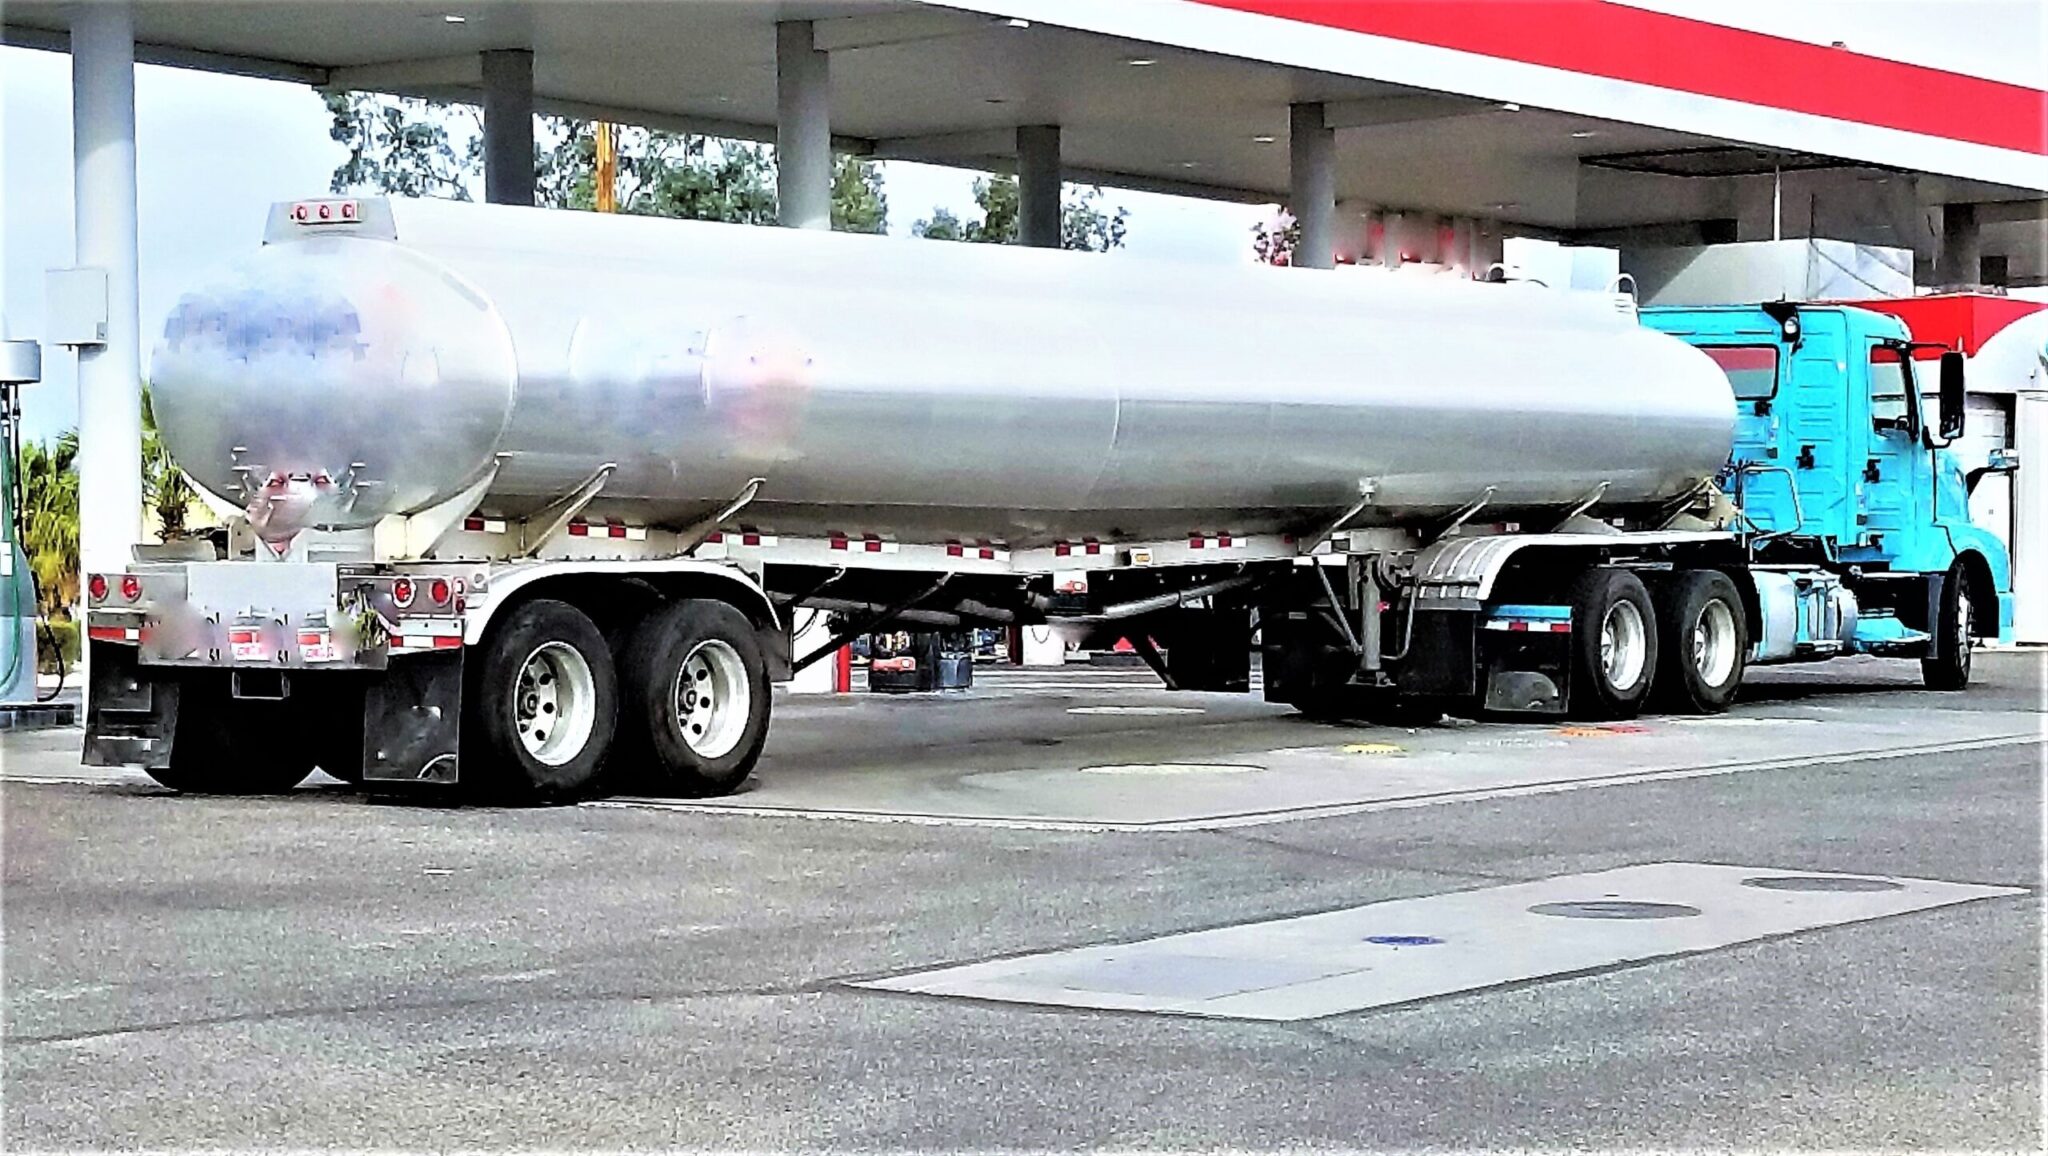 gas-and-oil-tanker-truck-refueling-the-gas-statio-2022-11-08-05-51-36-utc